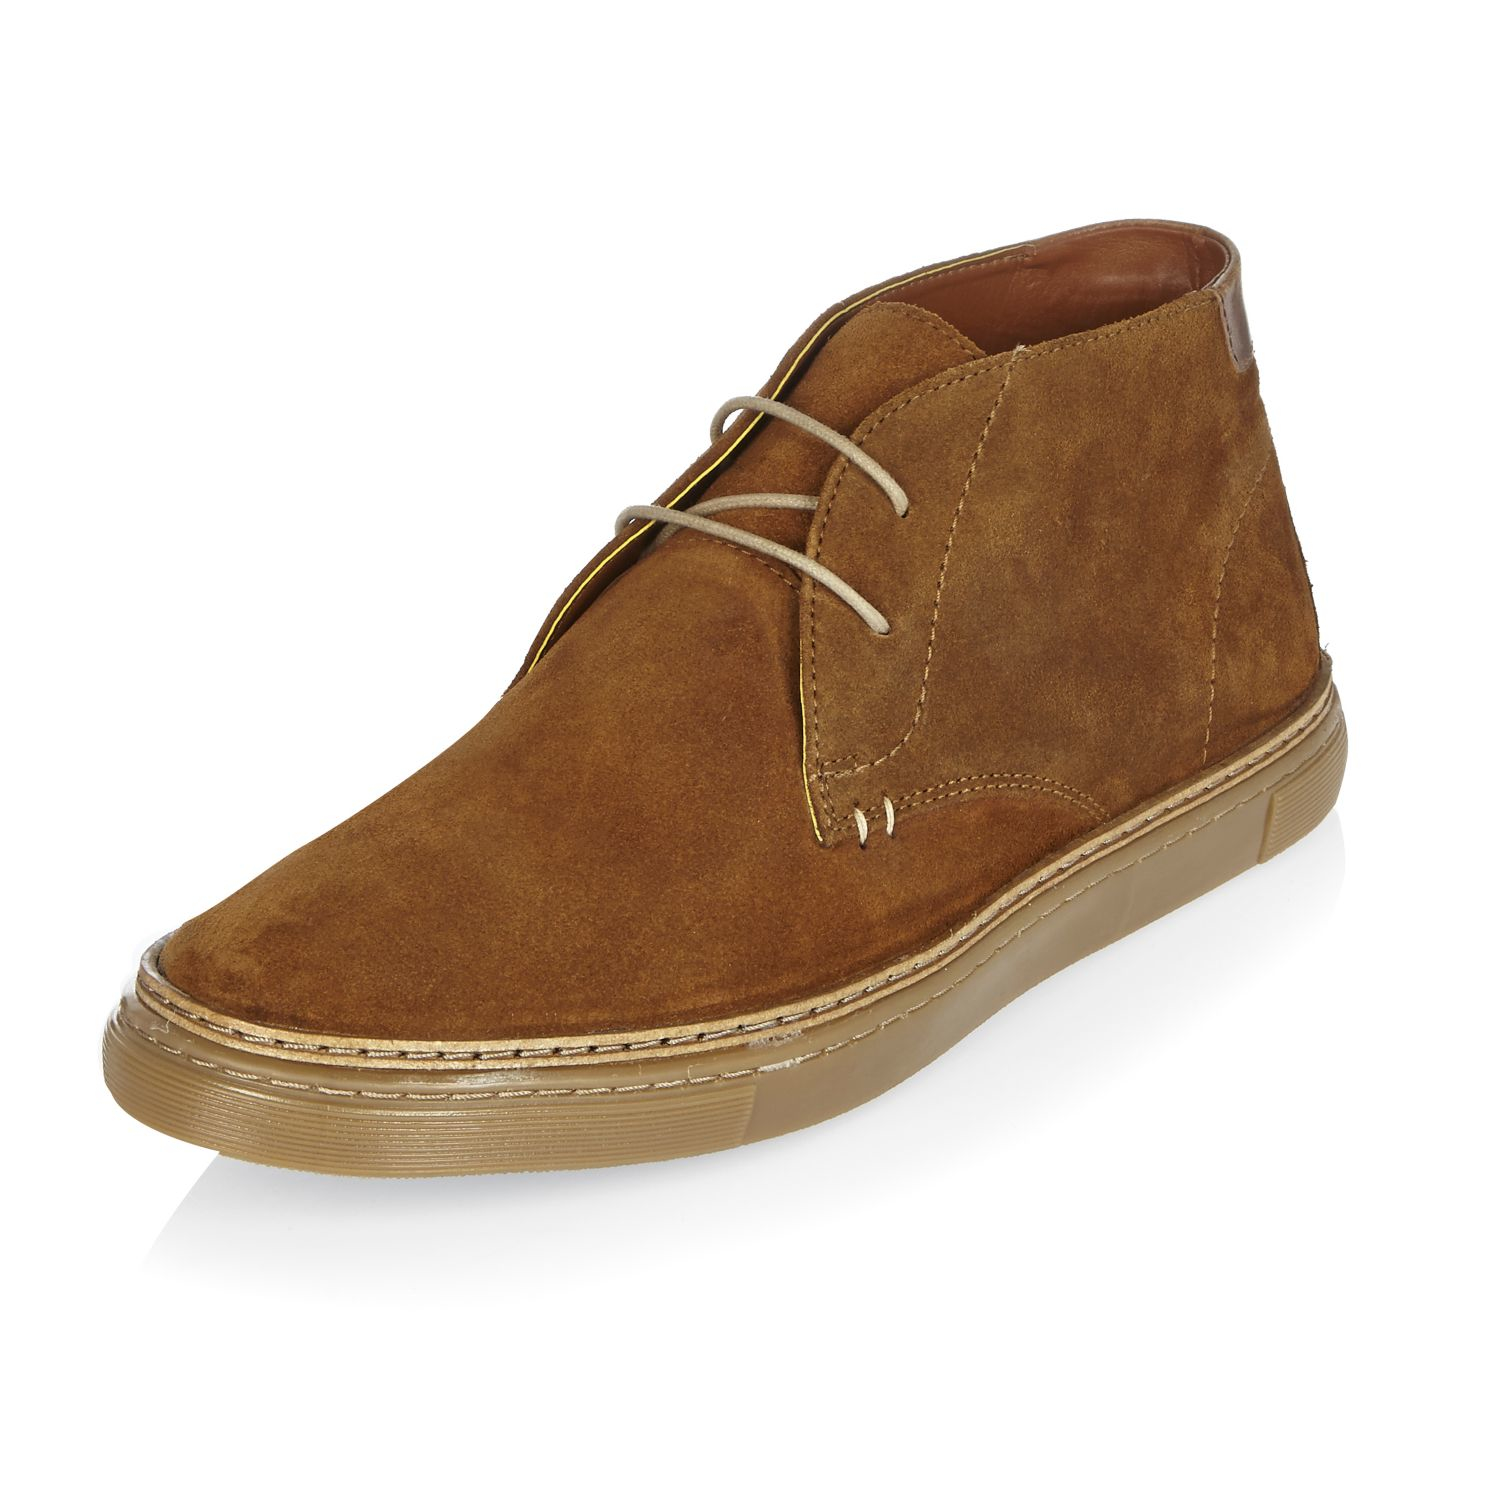 River Island Brown Suede Chukka Boots in Natural for Men - Lyst